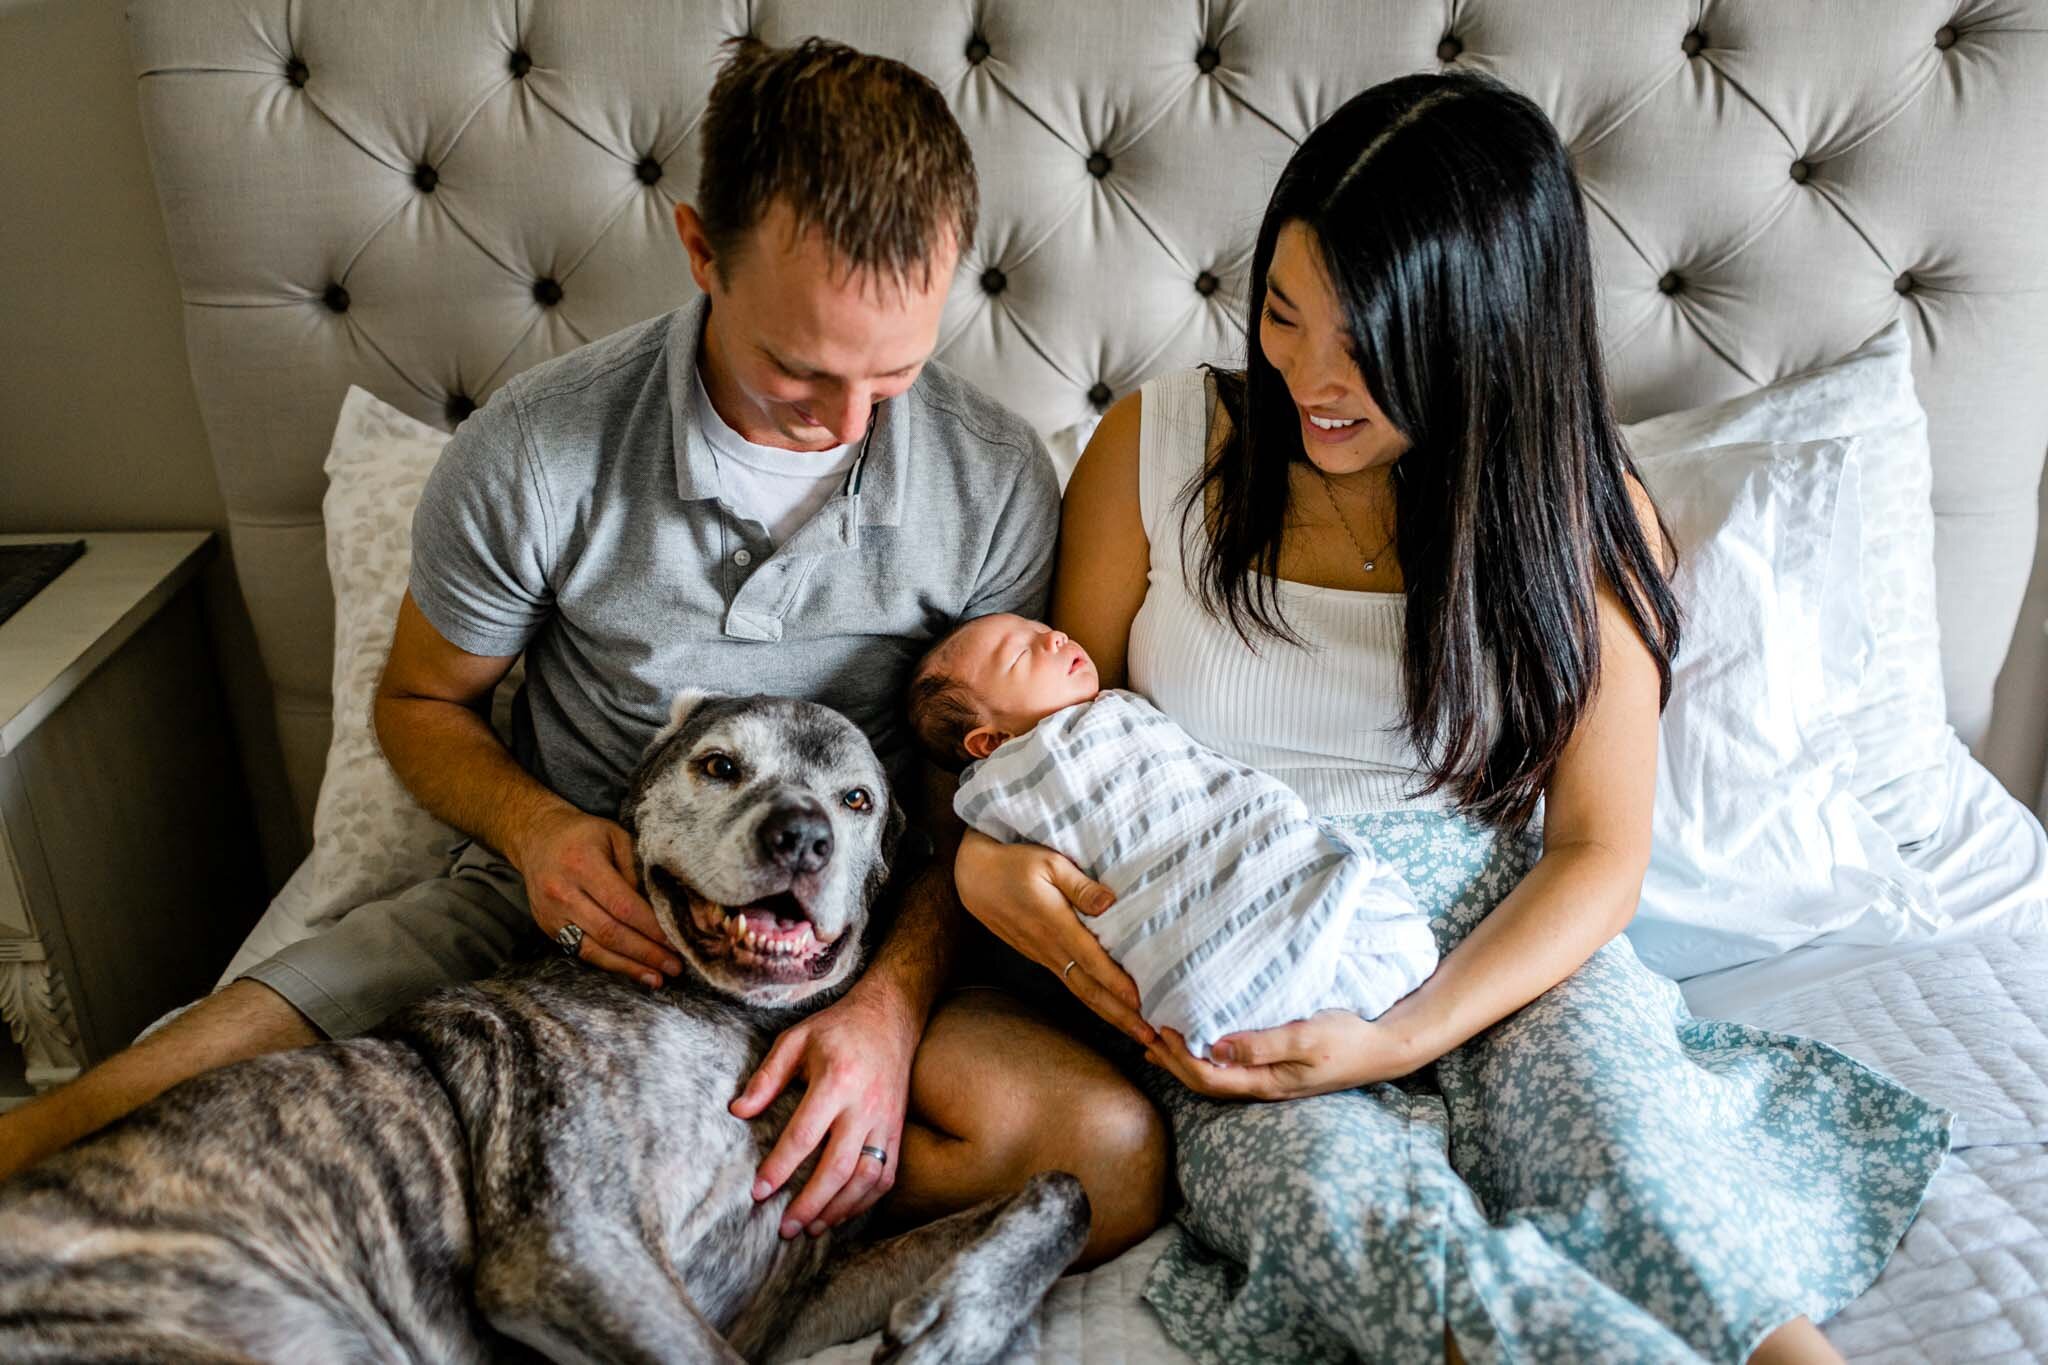 Durham Lifestyle Newborn Photography at Home | By G. Lin Photography | Couple holding dog and baby and sitting on bed